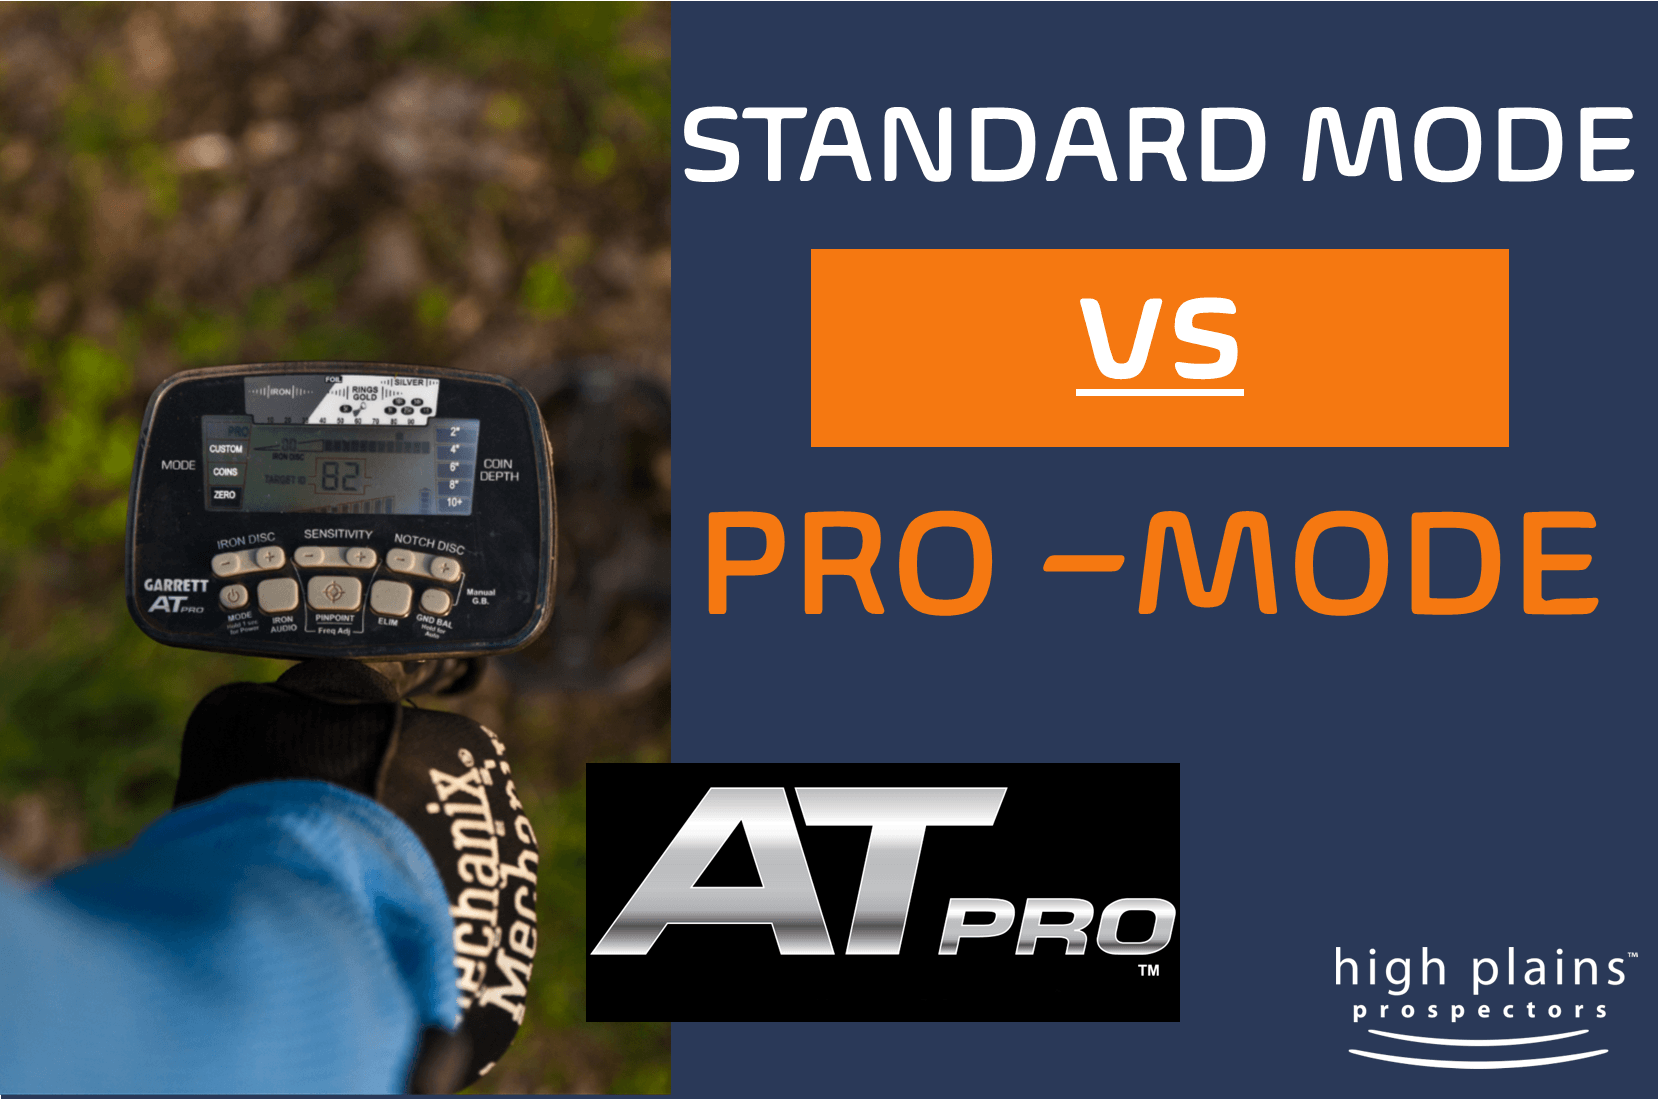 FAQ: What is the difference between the pro mode and standard mode on the Garrett AT Pro Metal Detector?